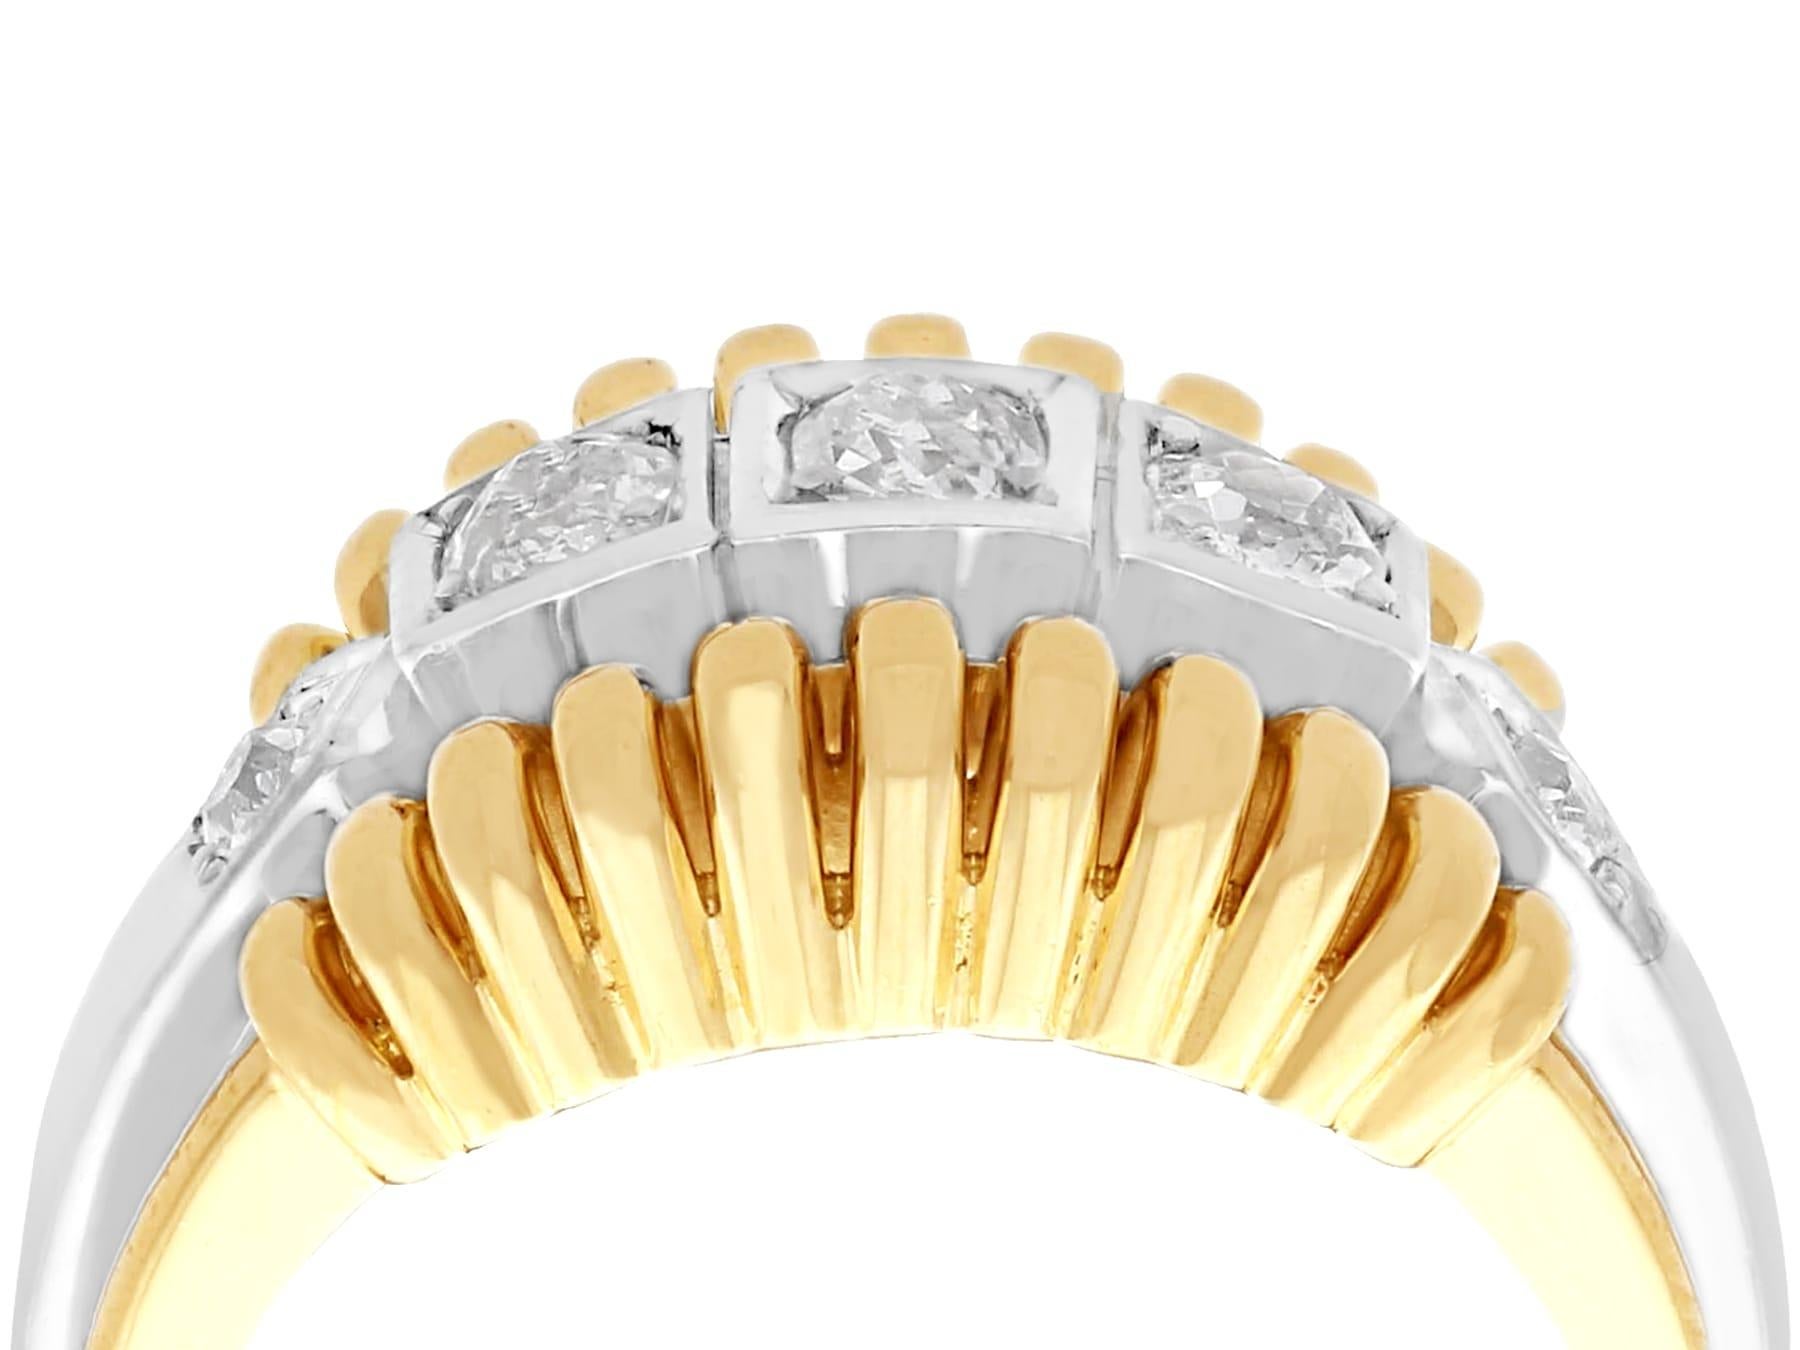 An impressive Art Deco style 0.88 carat diamond and 14k yellow gold, 14k white gold set dress ring; part of our diverse diamond jewelry collections.

This fine and impressive vintage diamond band ring has been crafted in 14k yellow gold with a 14k